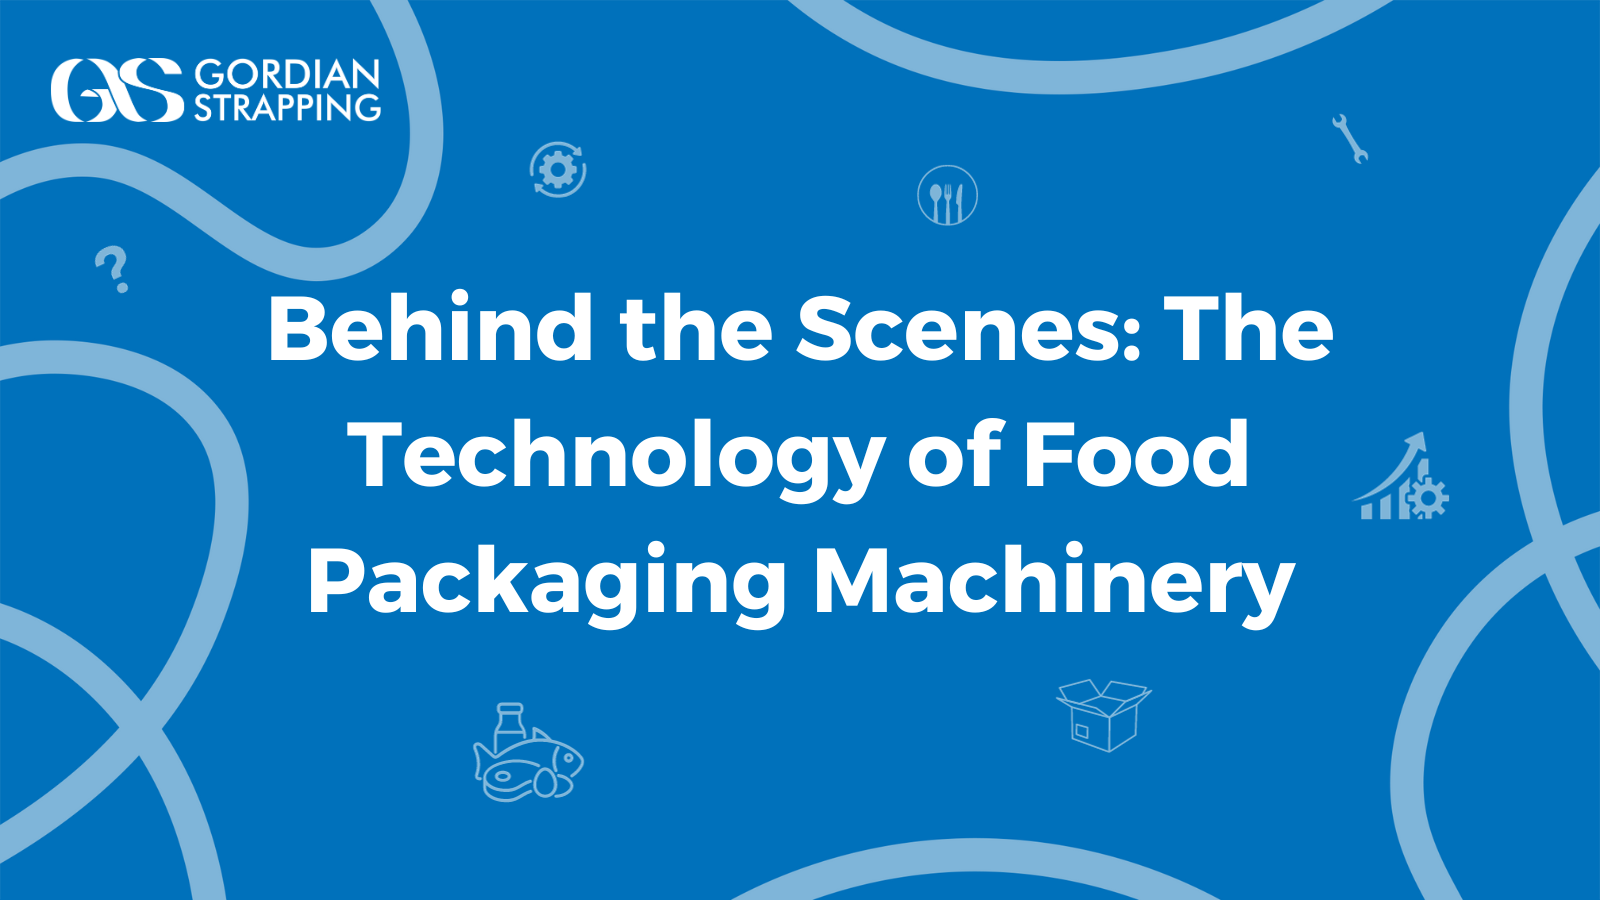 Behind the Scenes: The Technology of Food Packaging Machinery